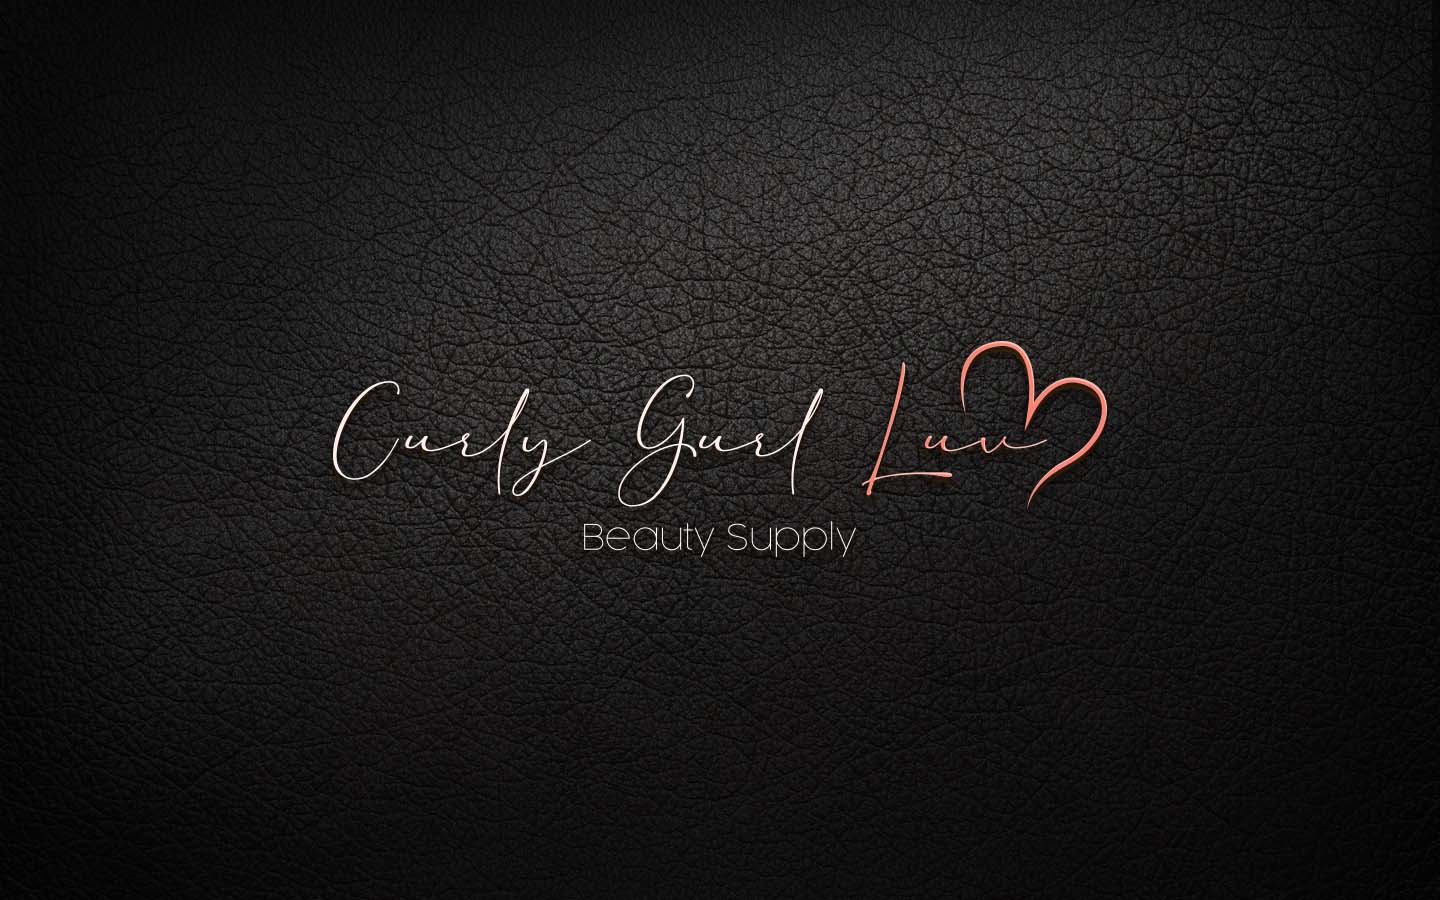 MEN – Curly Gurl Luv Beauty Supply